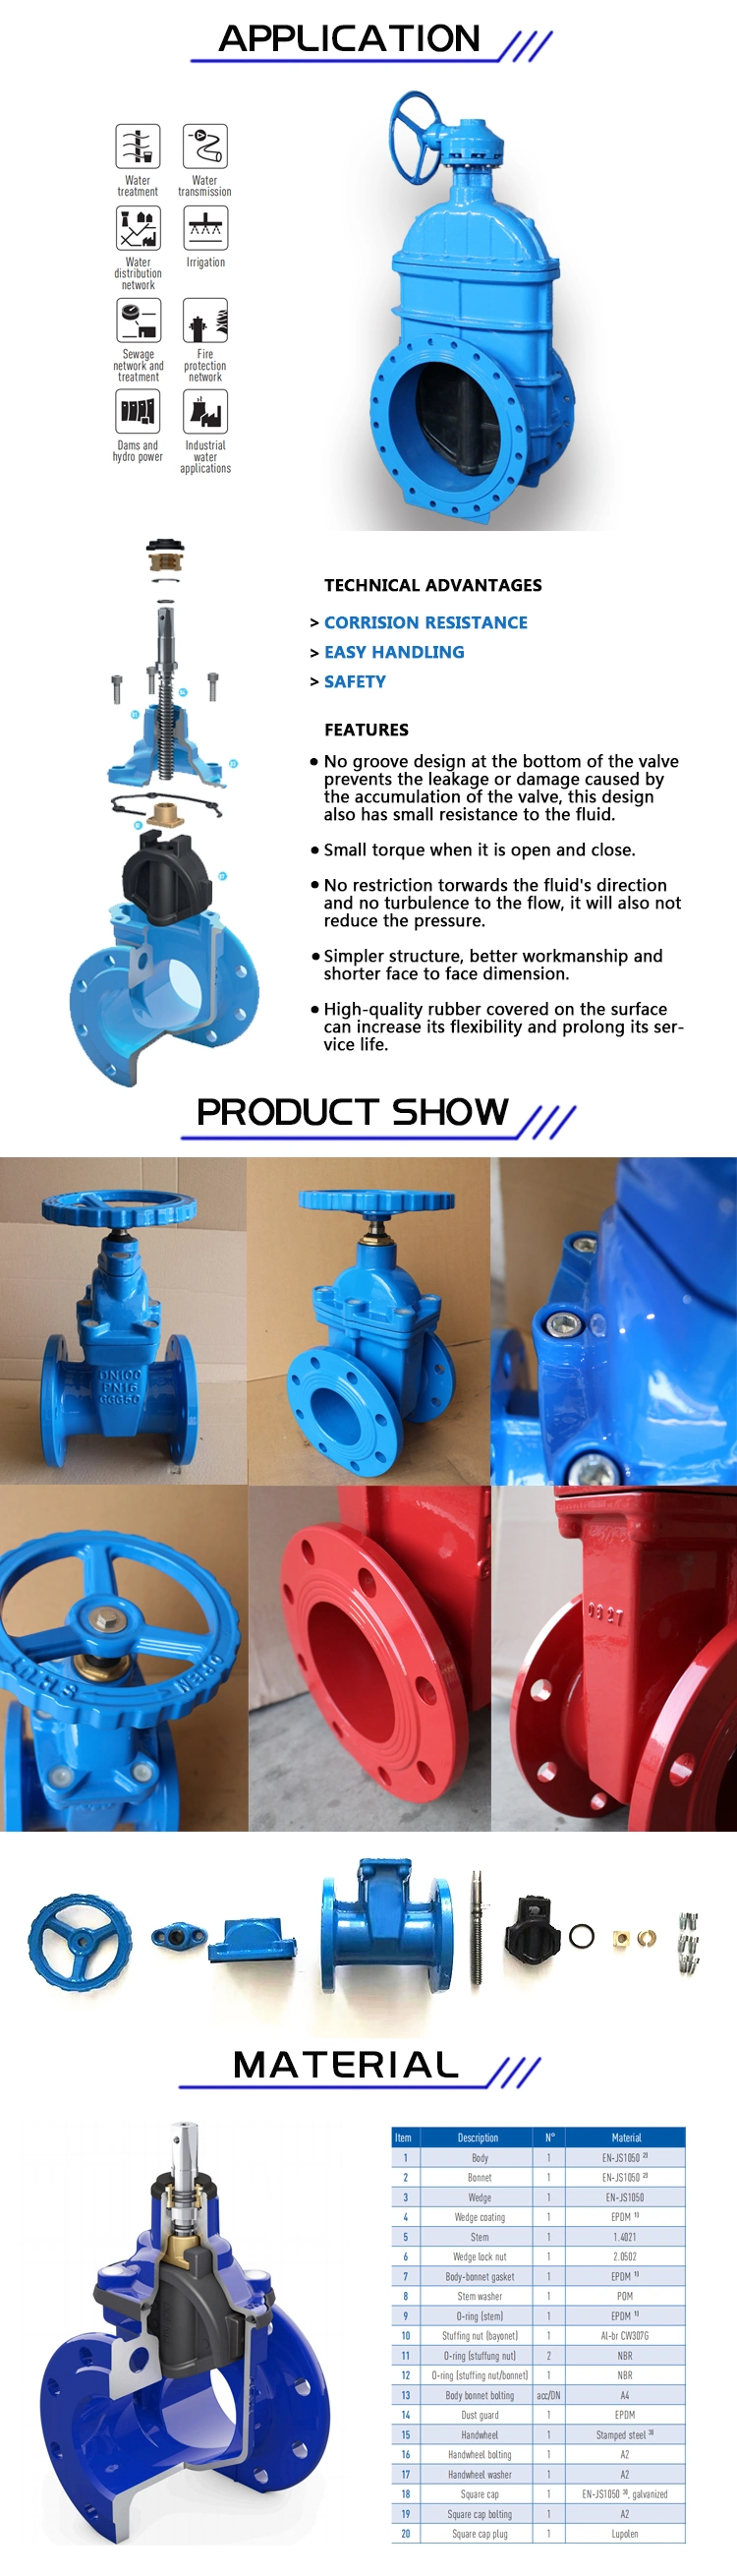 2" 4" Water Valve Resilient Seat Soft Seal Flange Water Control / Gate Valve with Manual/Electric Actuator